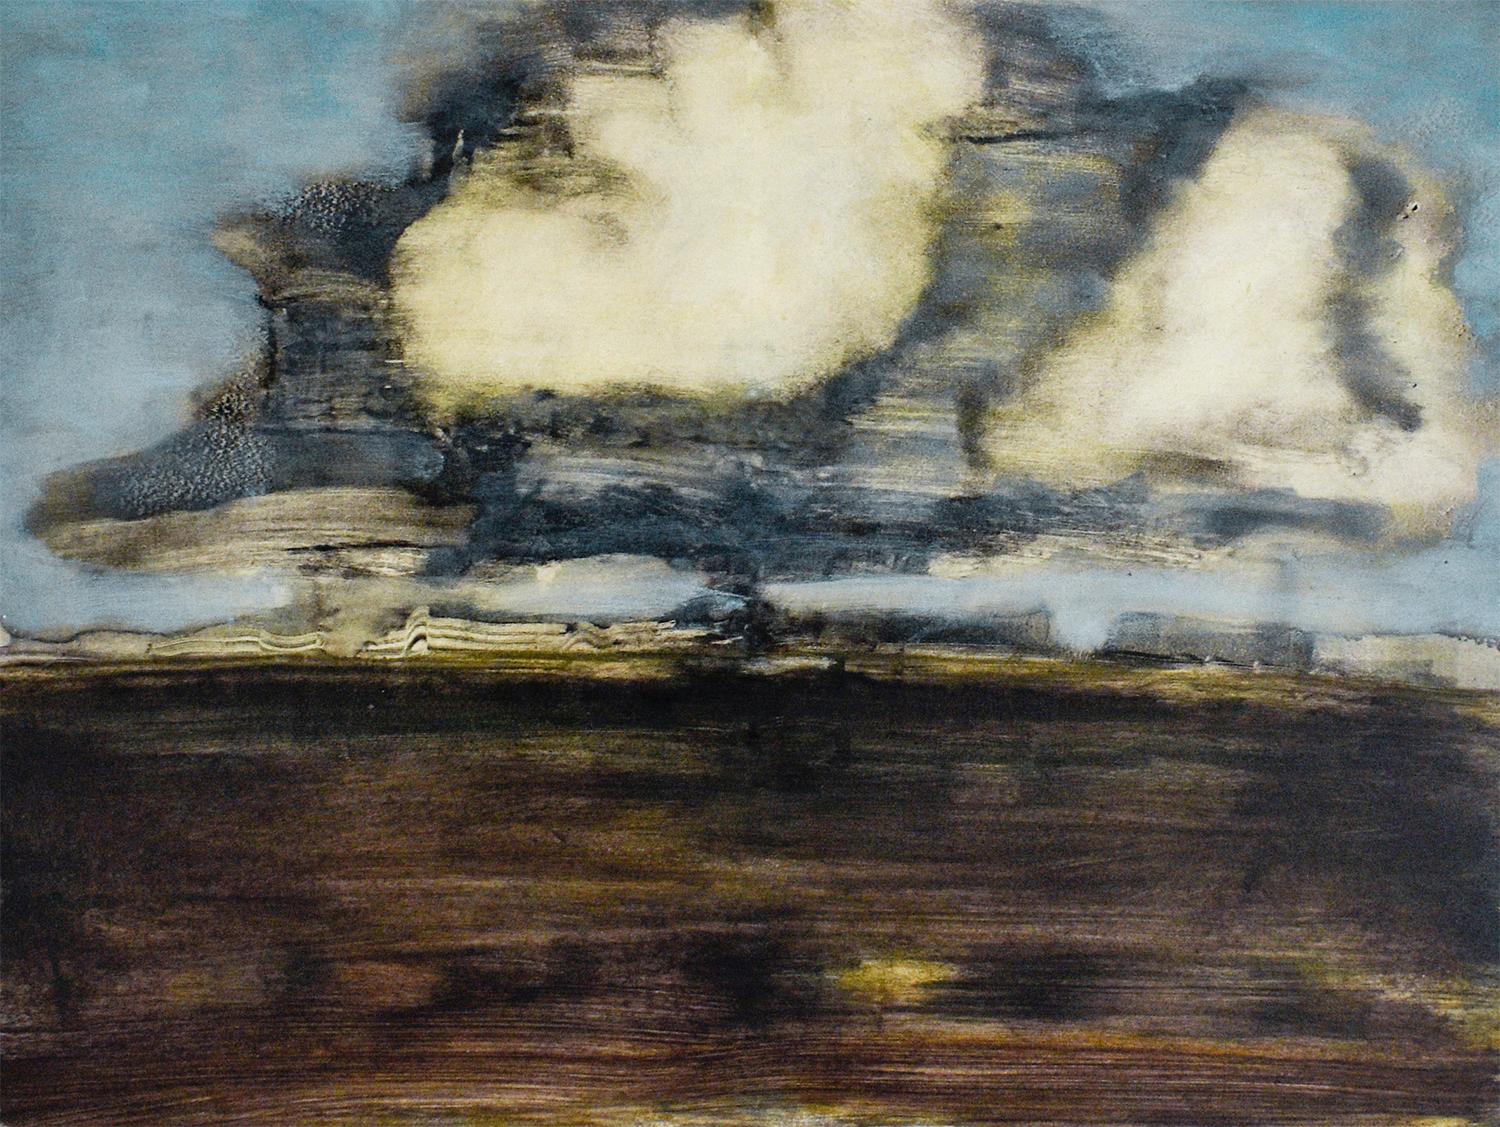 West Wind (Abstracted Landscape of Country Field, Clouds, and Light Blue Sky)